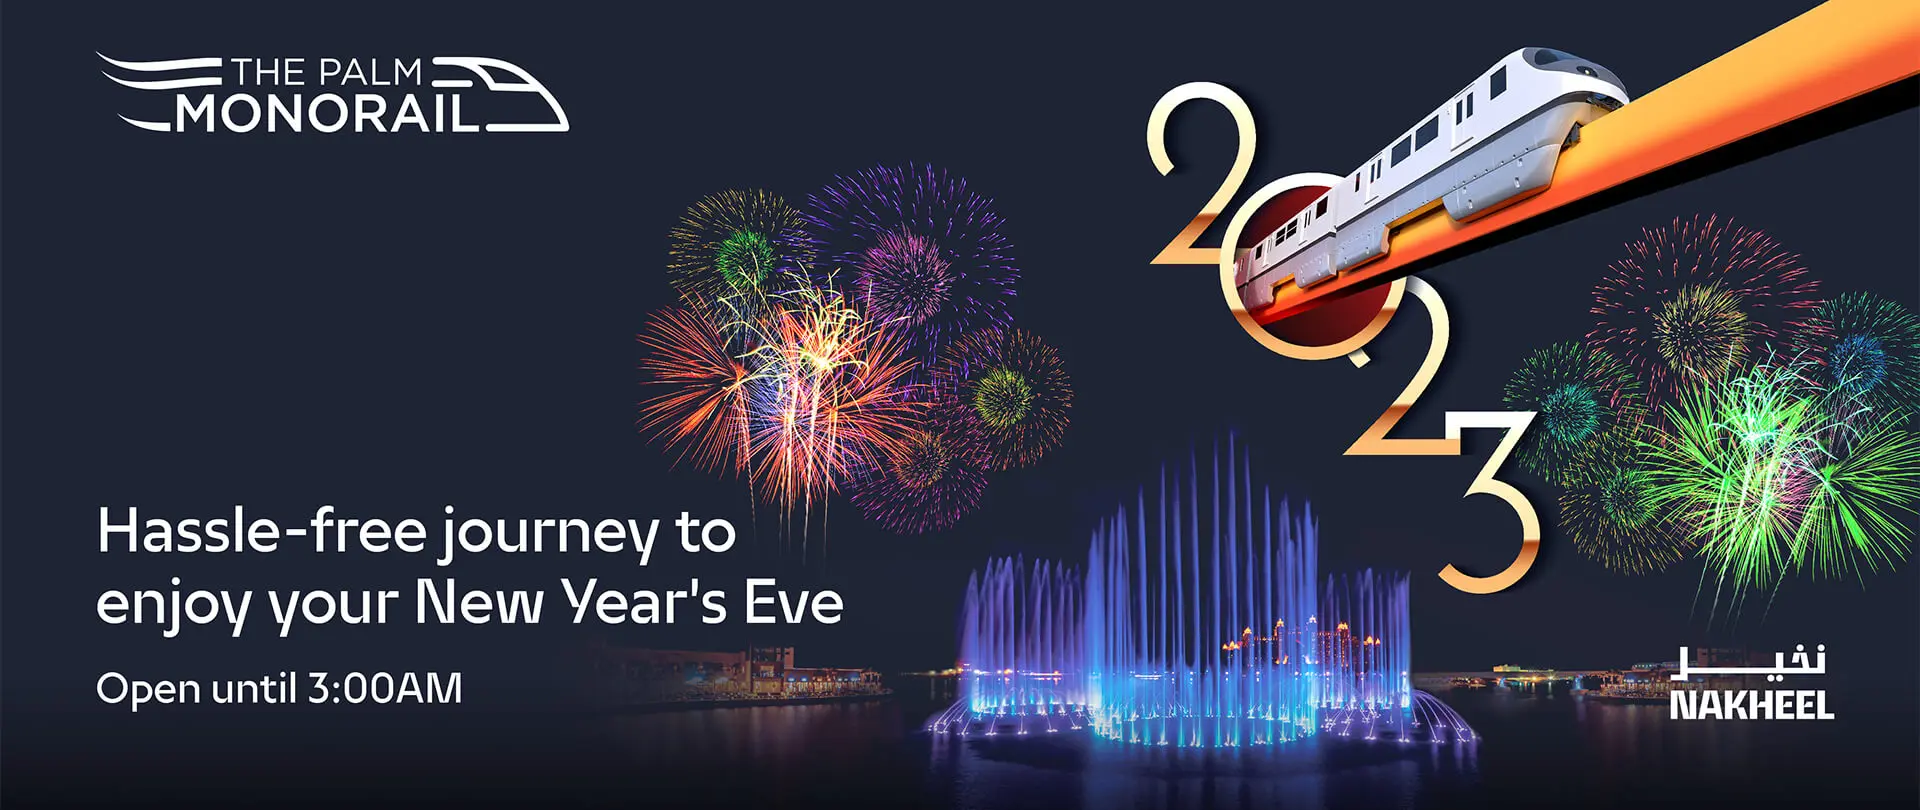 Hassle free journey to enjoy your New Year's Eve 